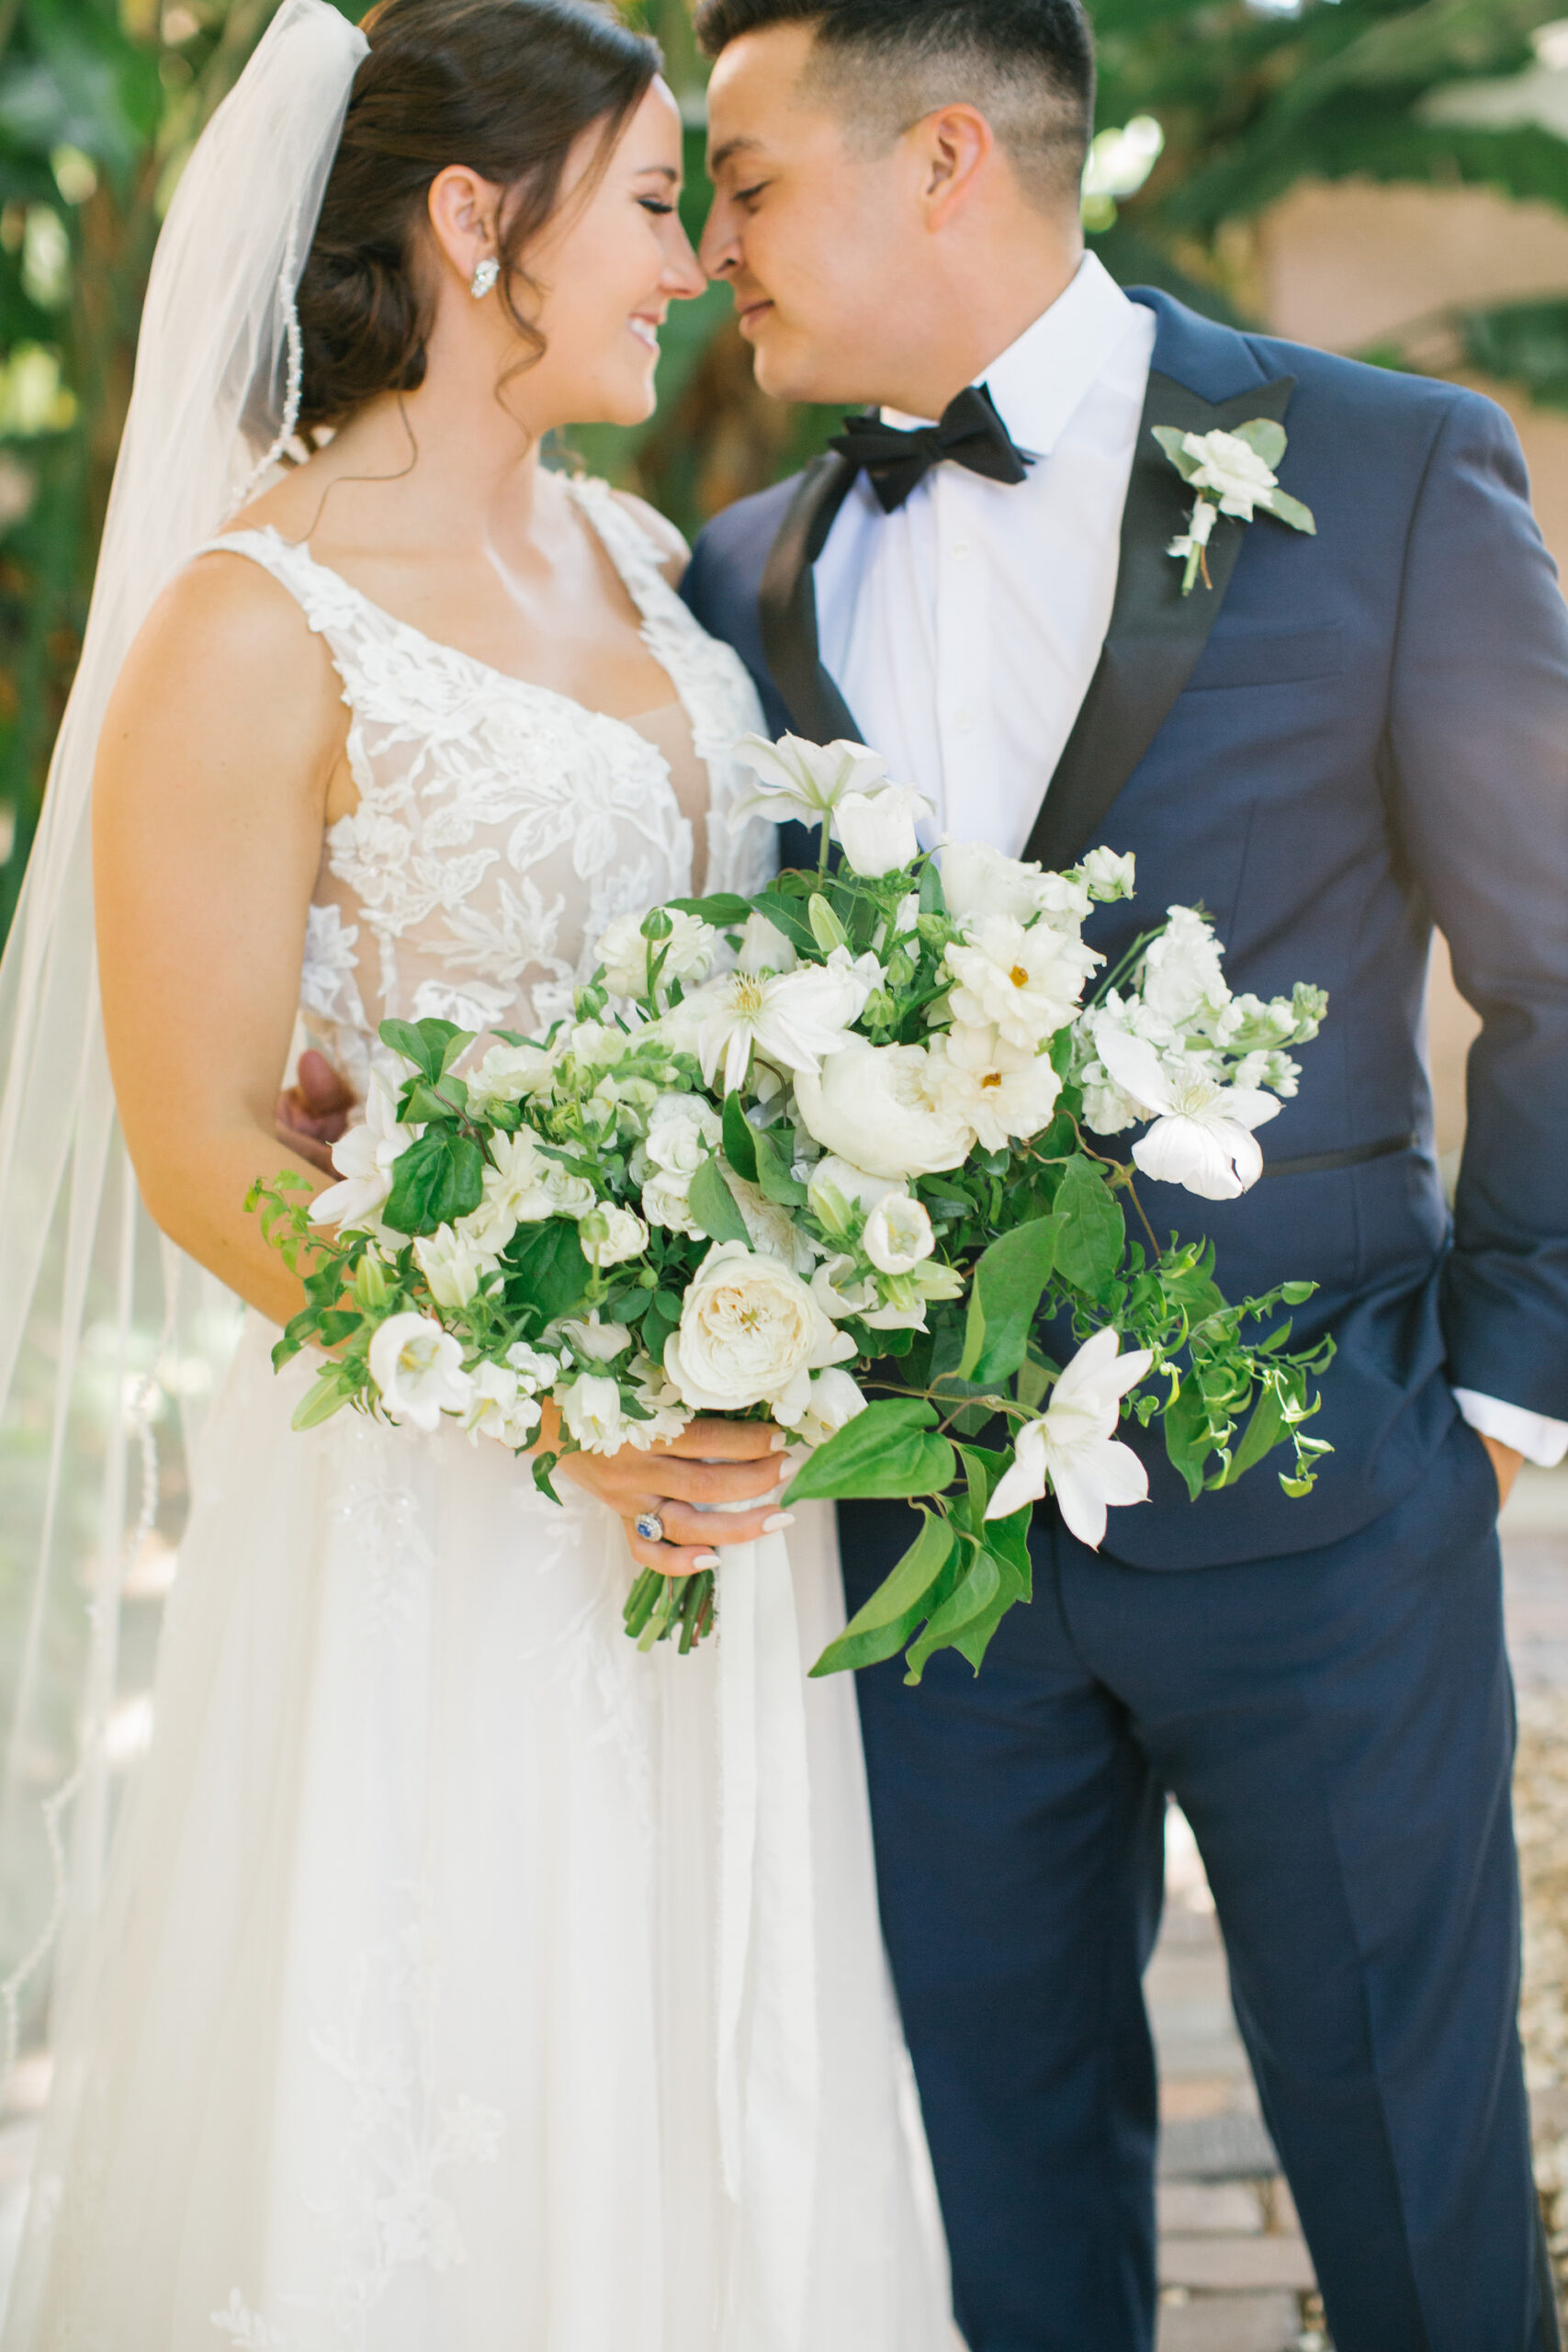 Bride and Groom Wedding Portrait | Large White Garden Rose, Orchid And Greenery Bridal Bouquet Ideas